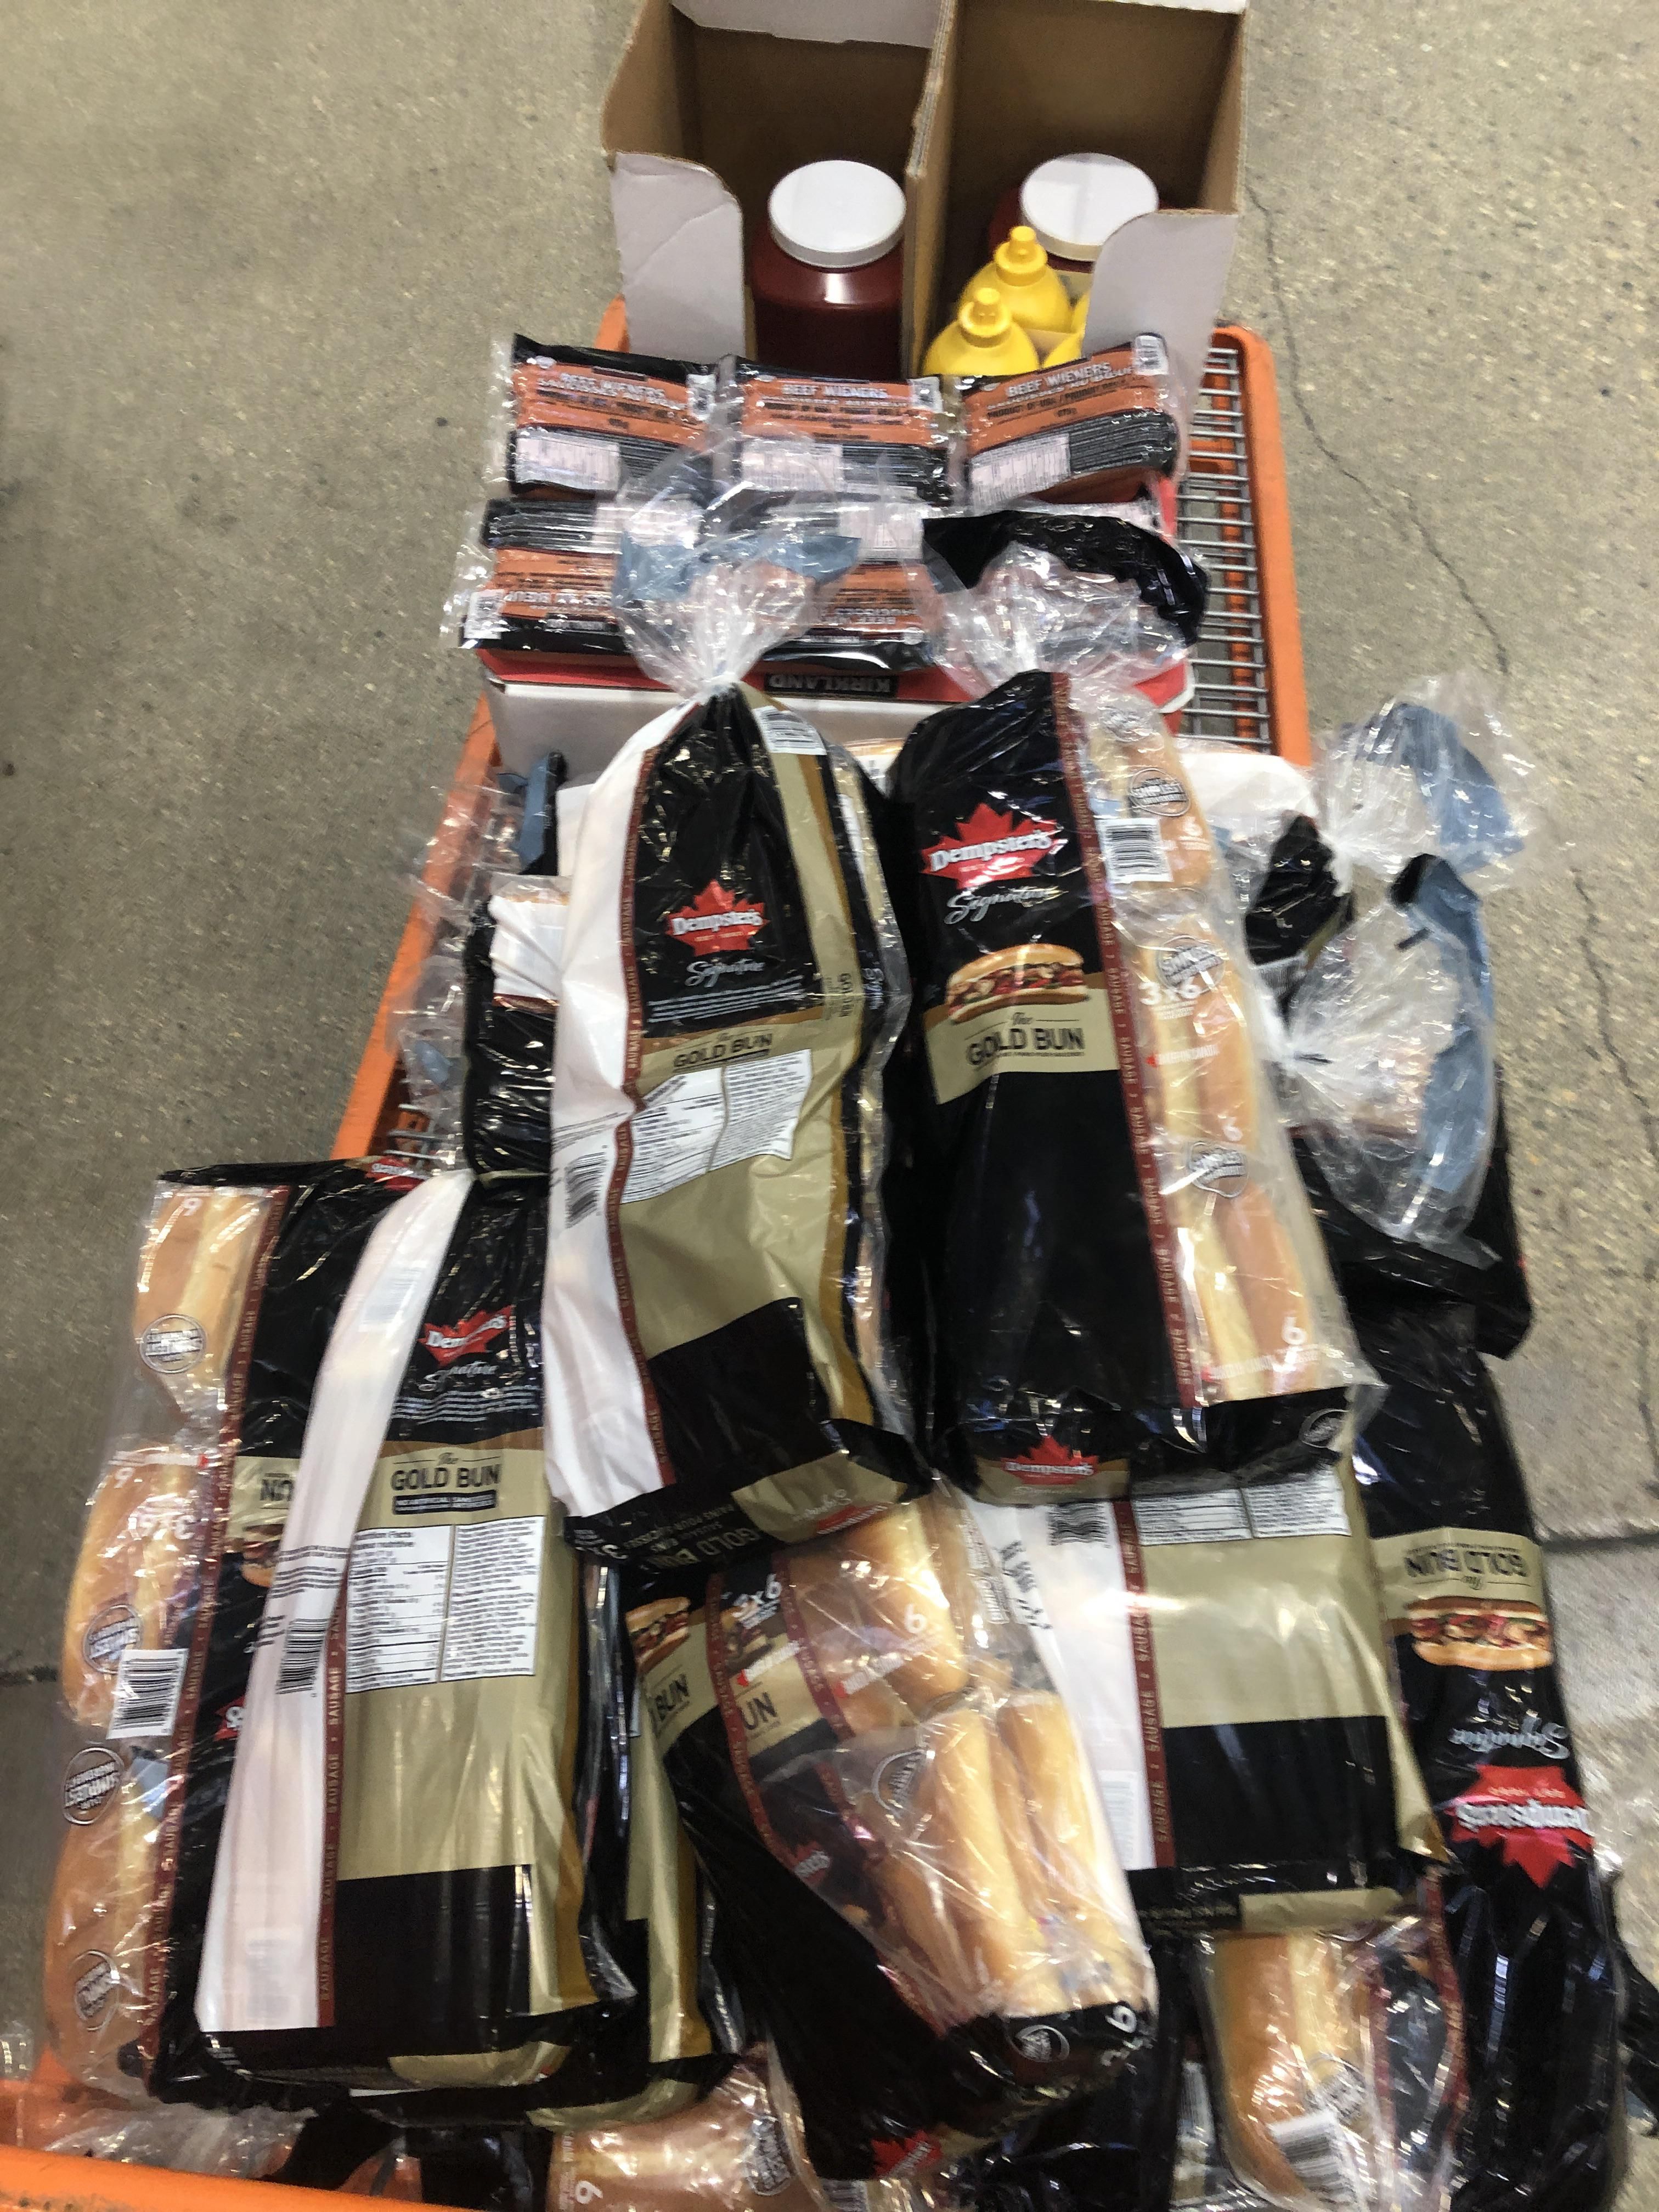 Cashier says, “oooh, looks like you’re having sausage party!” No no no… it’s a Barbecue. We’re calling it a Barbecue.